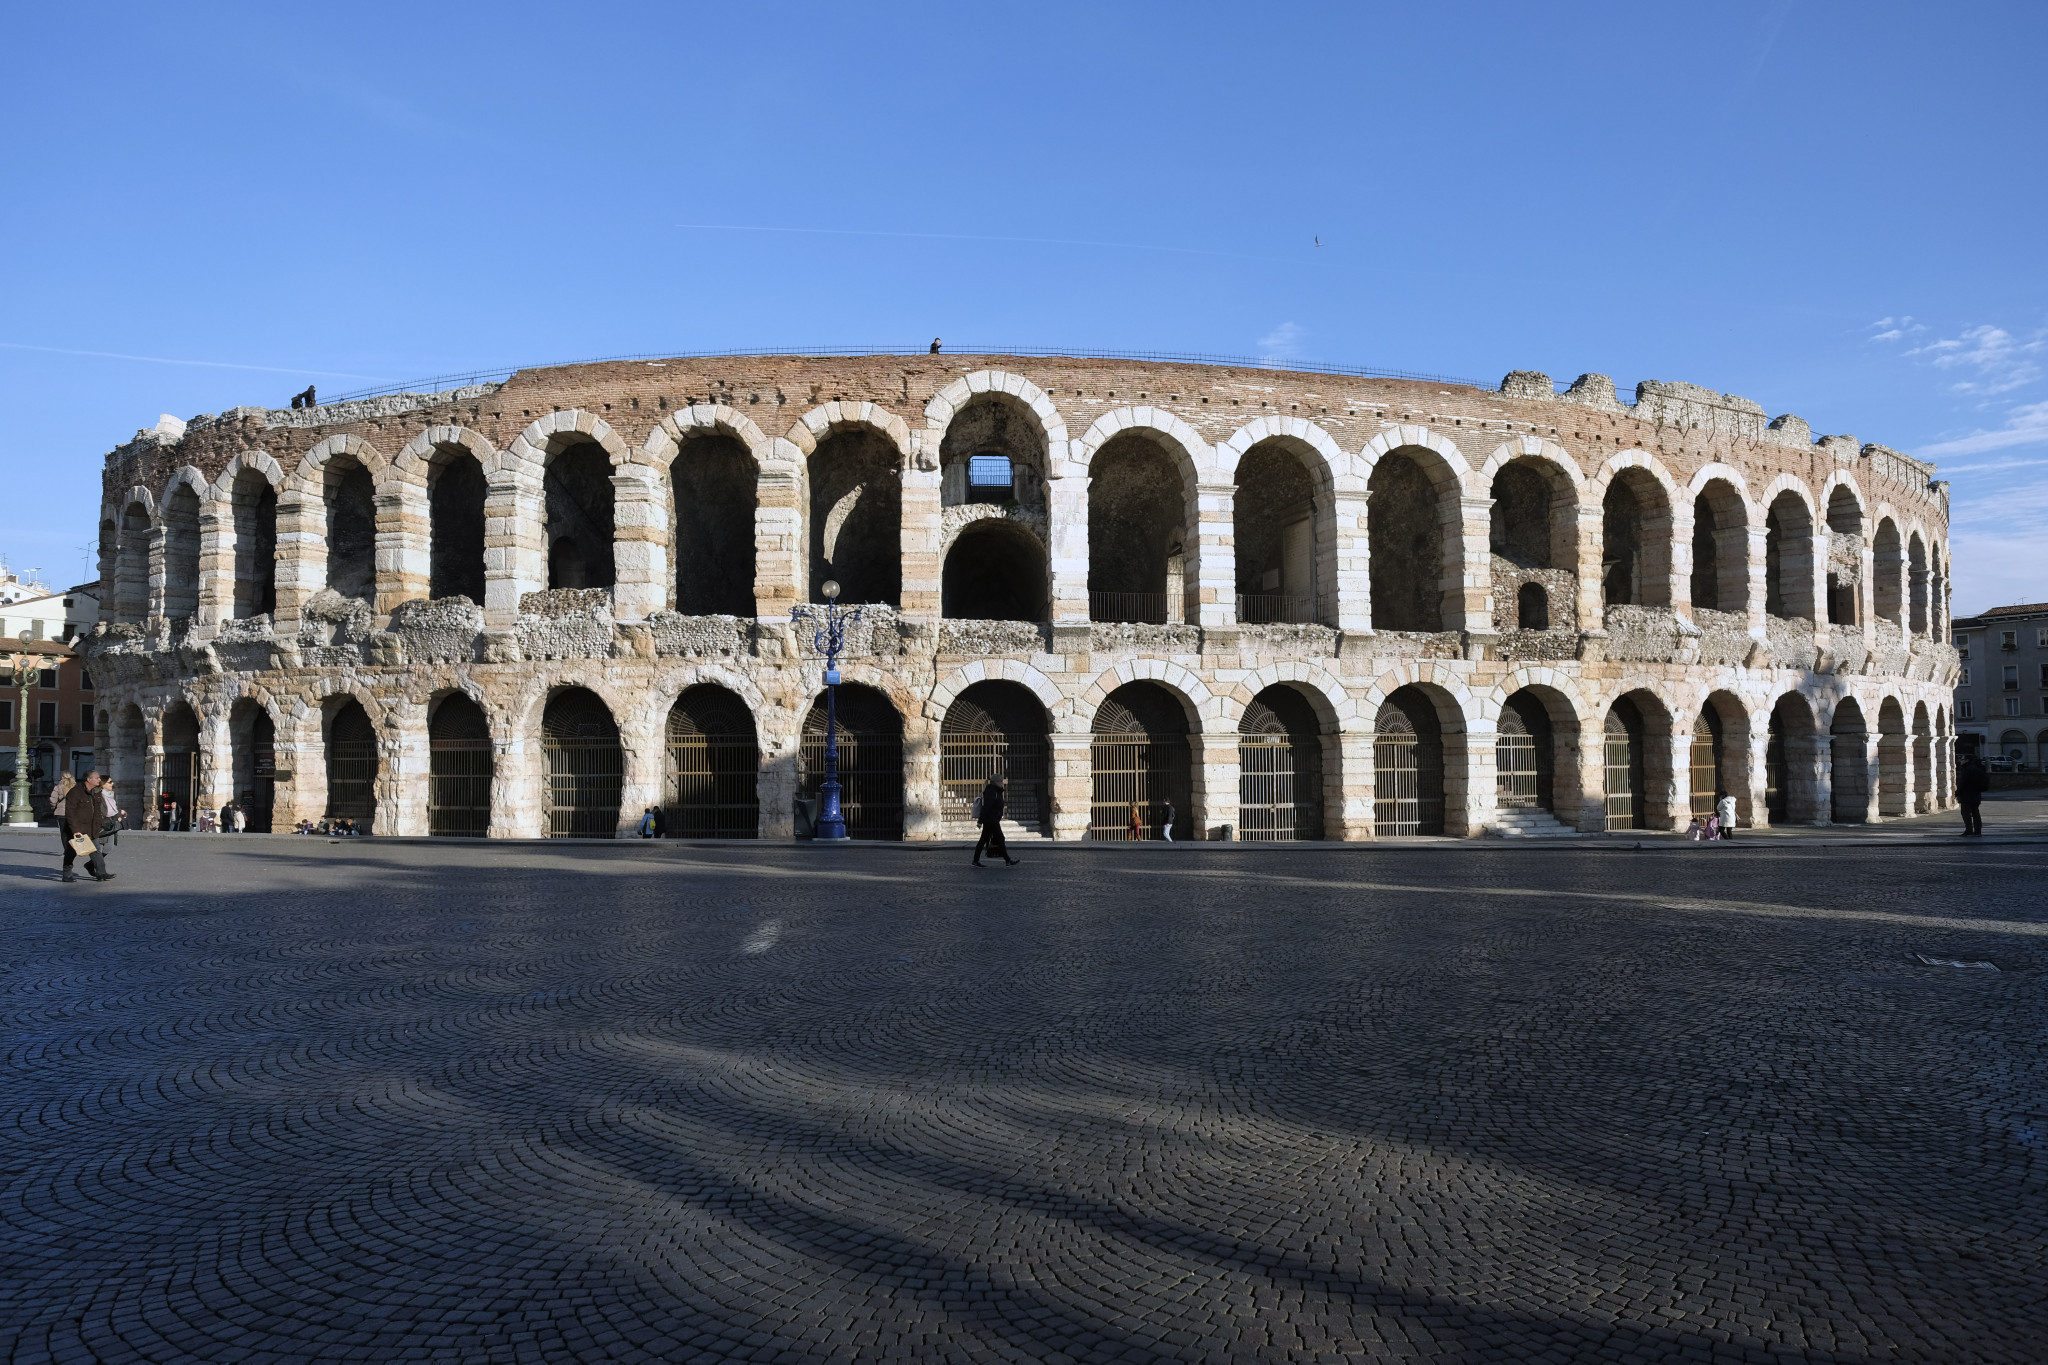 The Verona Arena is set to host the Closing Ceremonies at the Olympic and Paralympic Games in 2026, as well as the Paralympic Opening Ceremony ©Getty Images